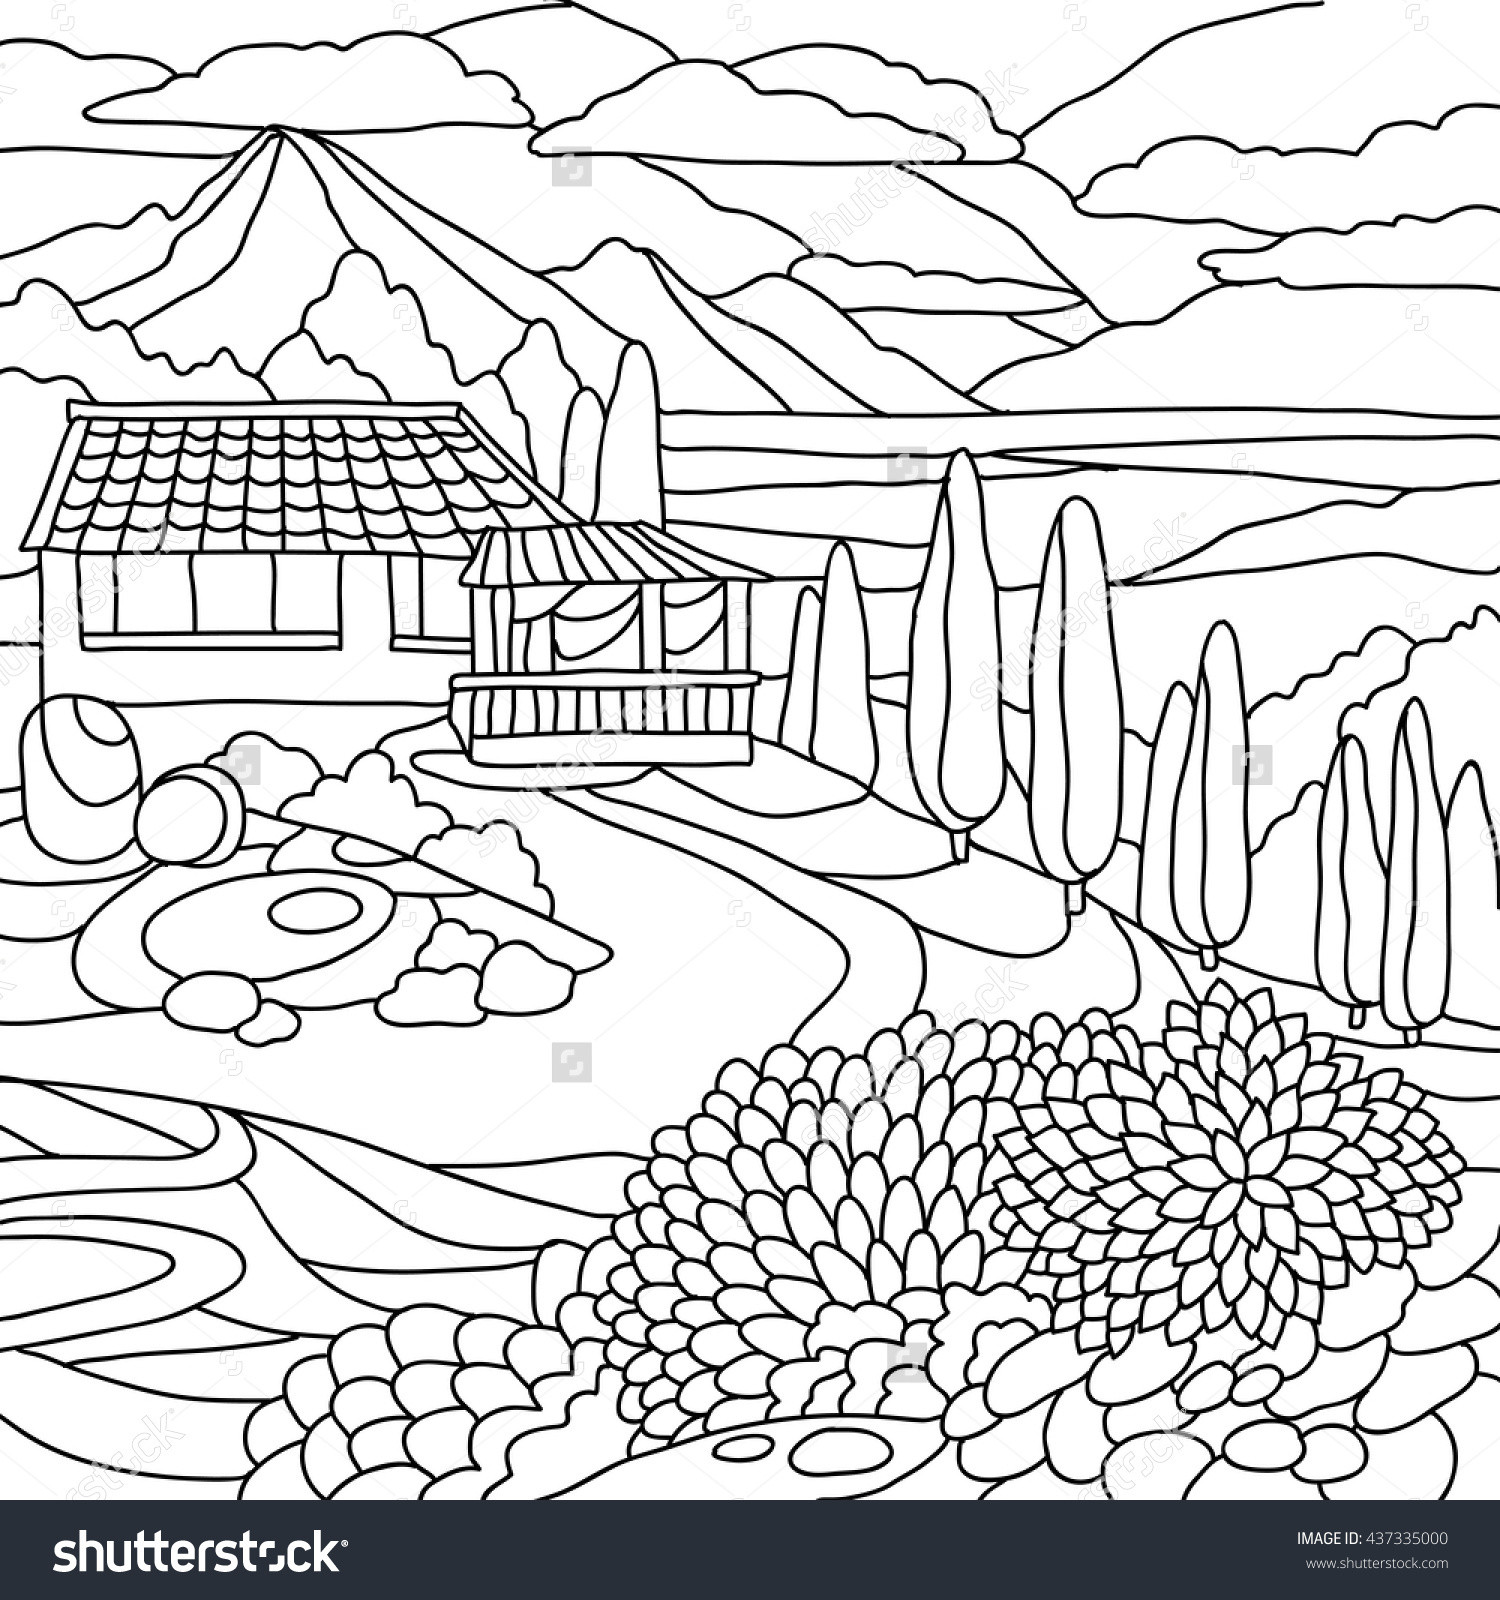 Free Coloring Pages Landscapes Printables at GetColorings.com | Free